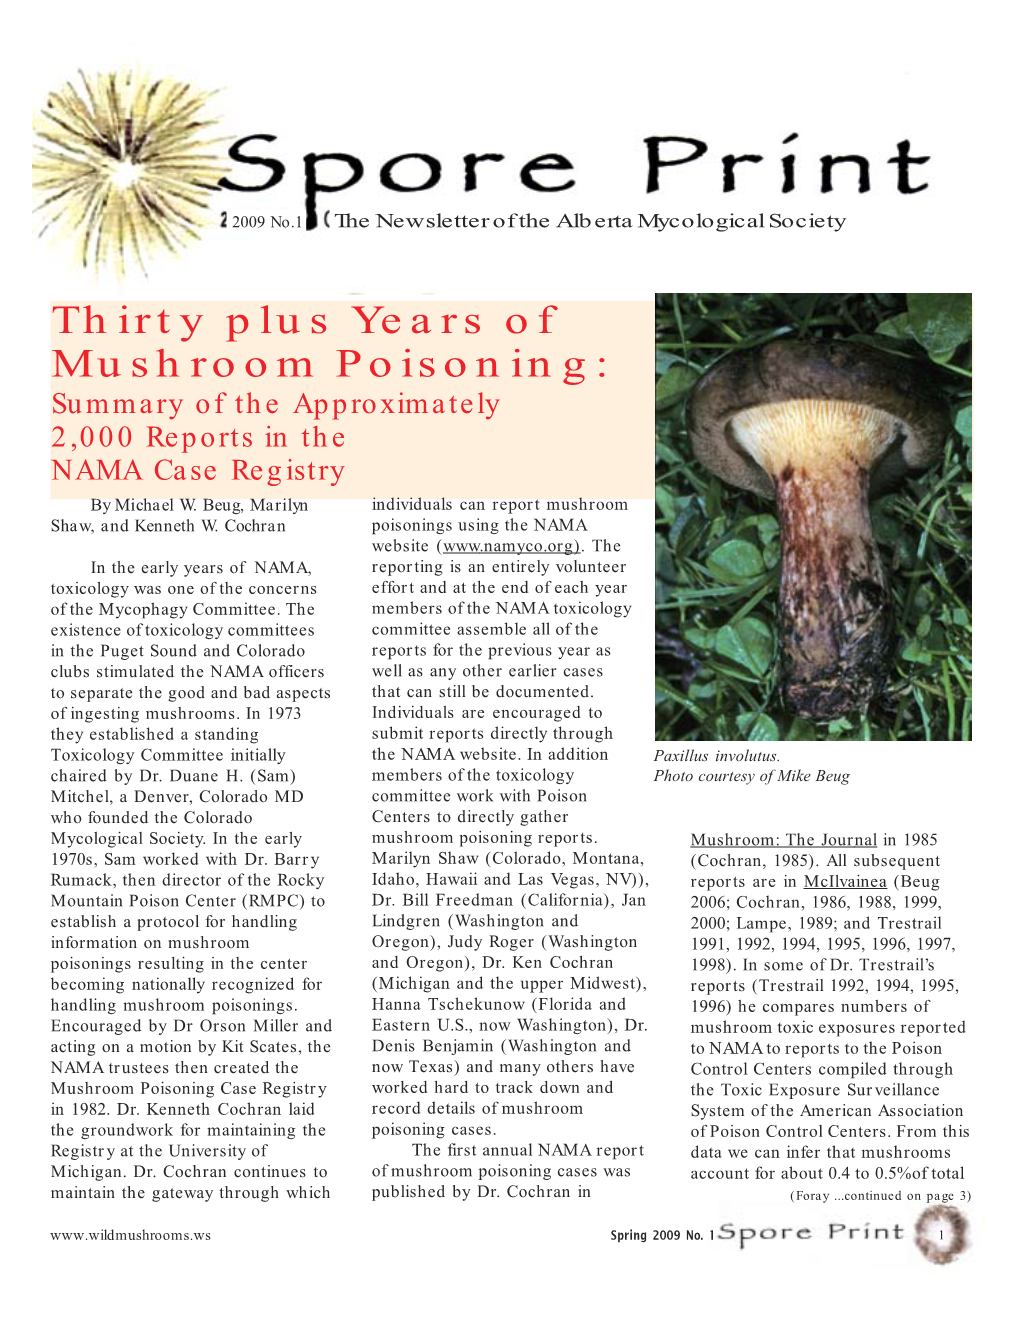 Thirty Plus Years of Mushroom Poisoning: Summary of the Approximately 2,000 Reports in the NAMA Case Registry by Michael W